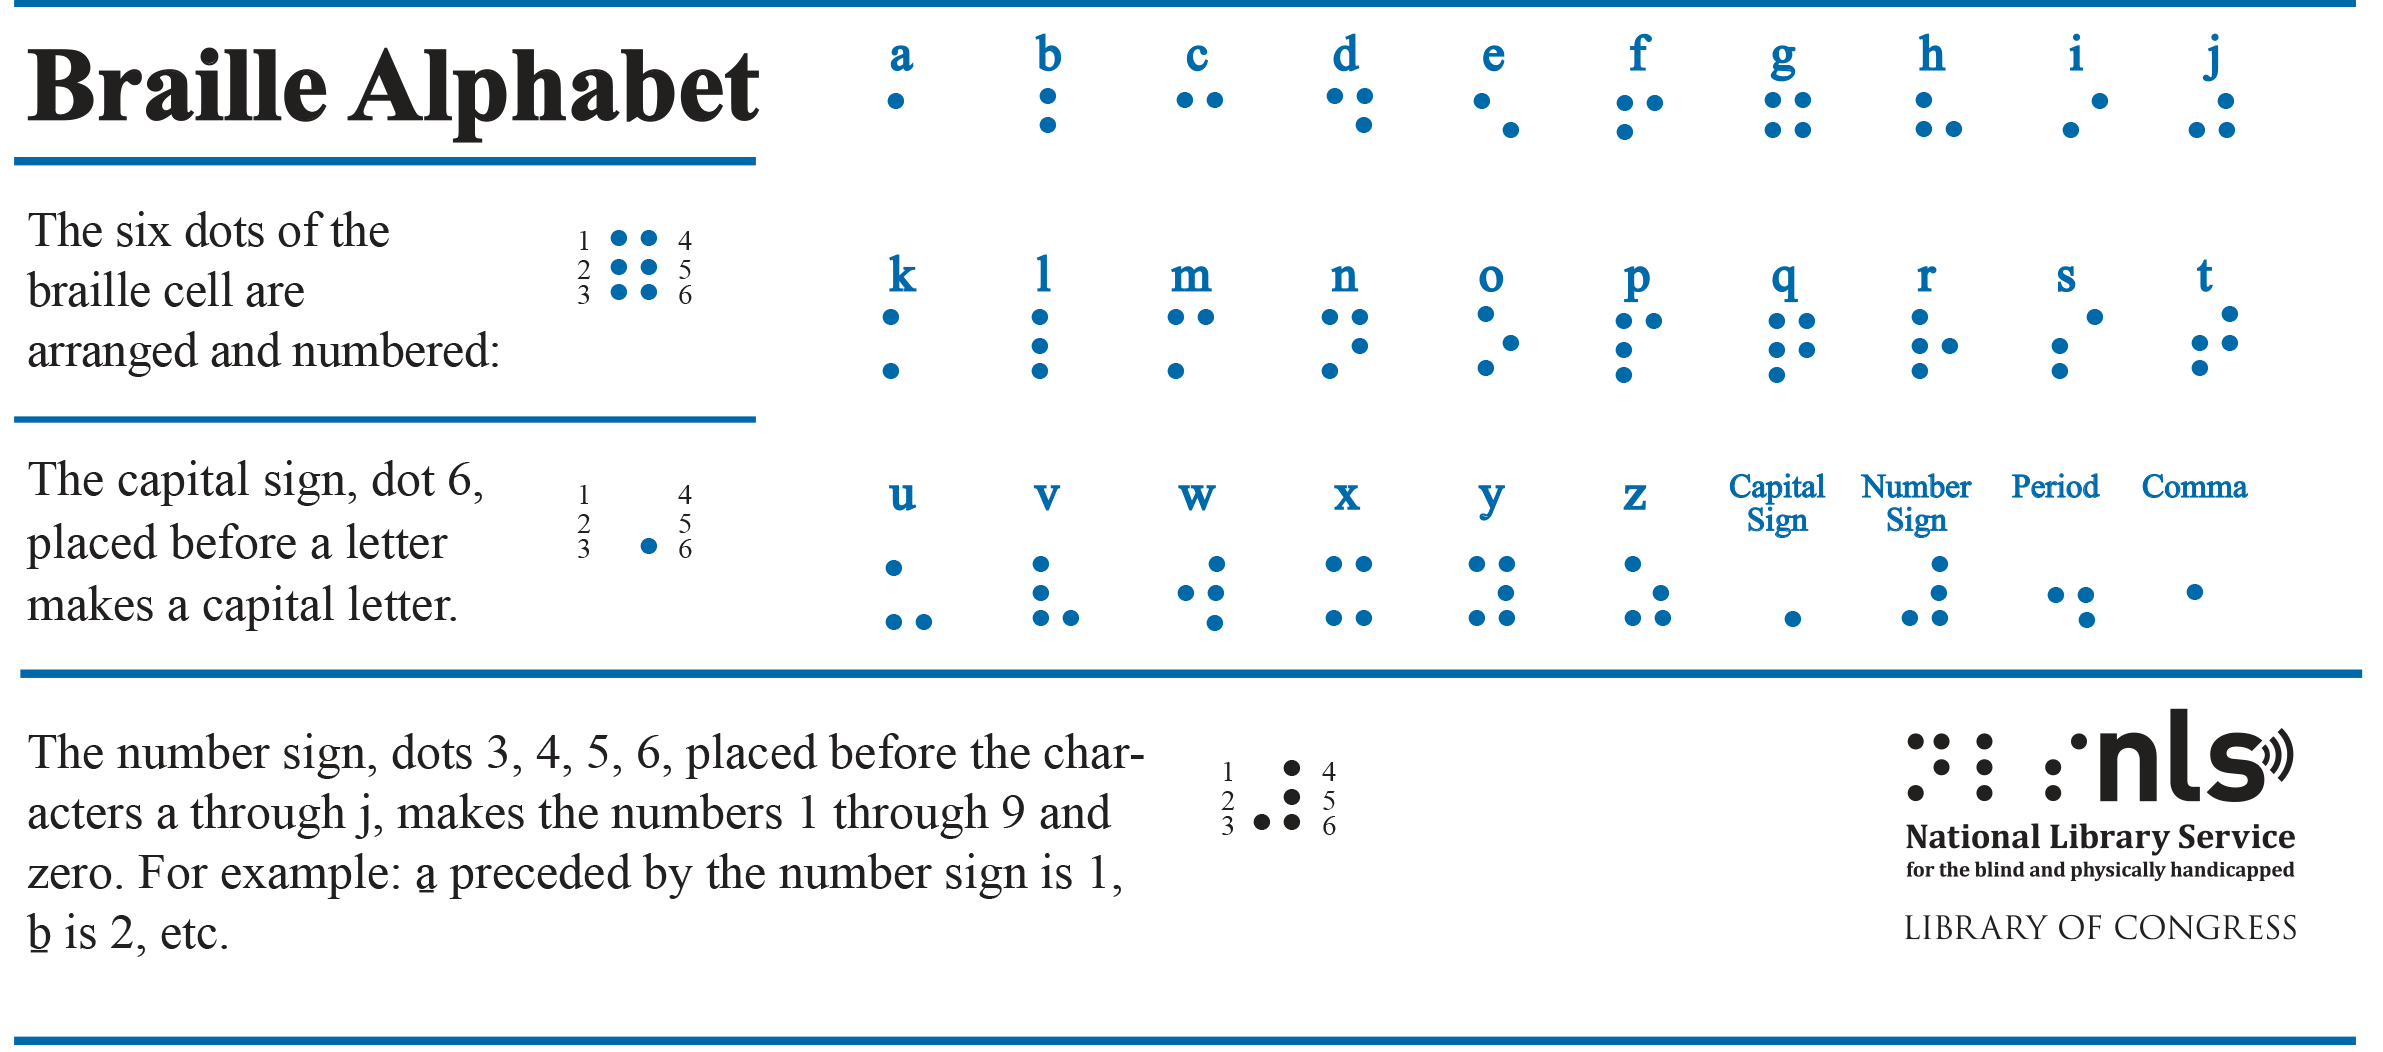 Braille Alphabet Card - National Library Service for the Blind and Print Disabled (NLS) | Library of Congress